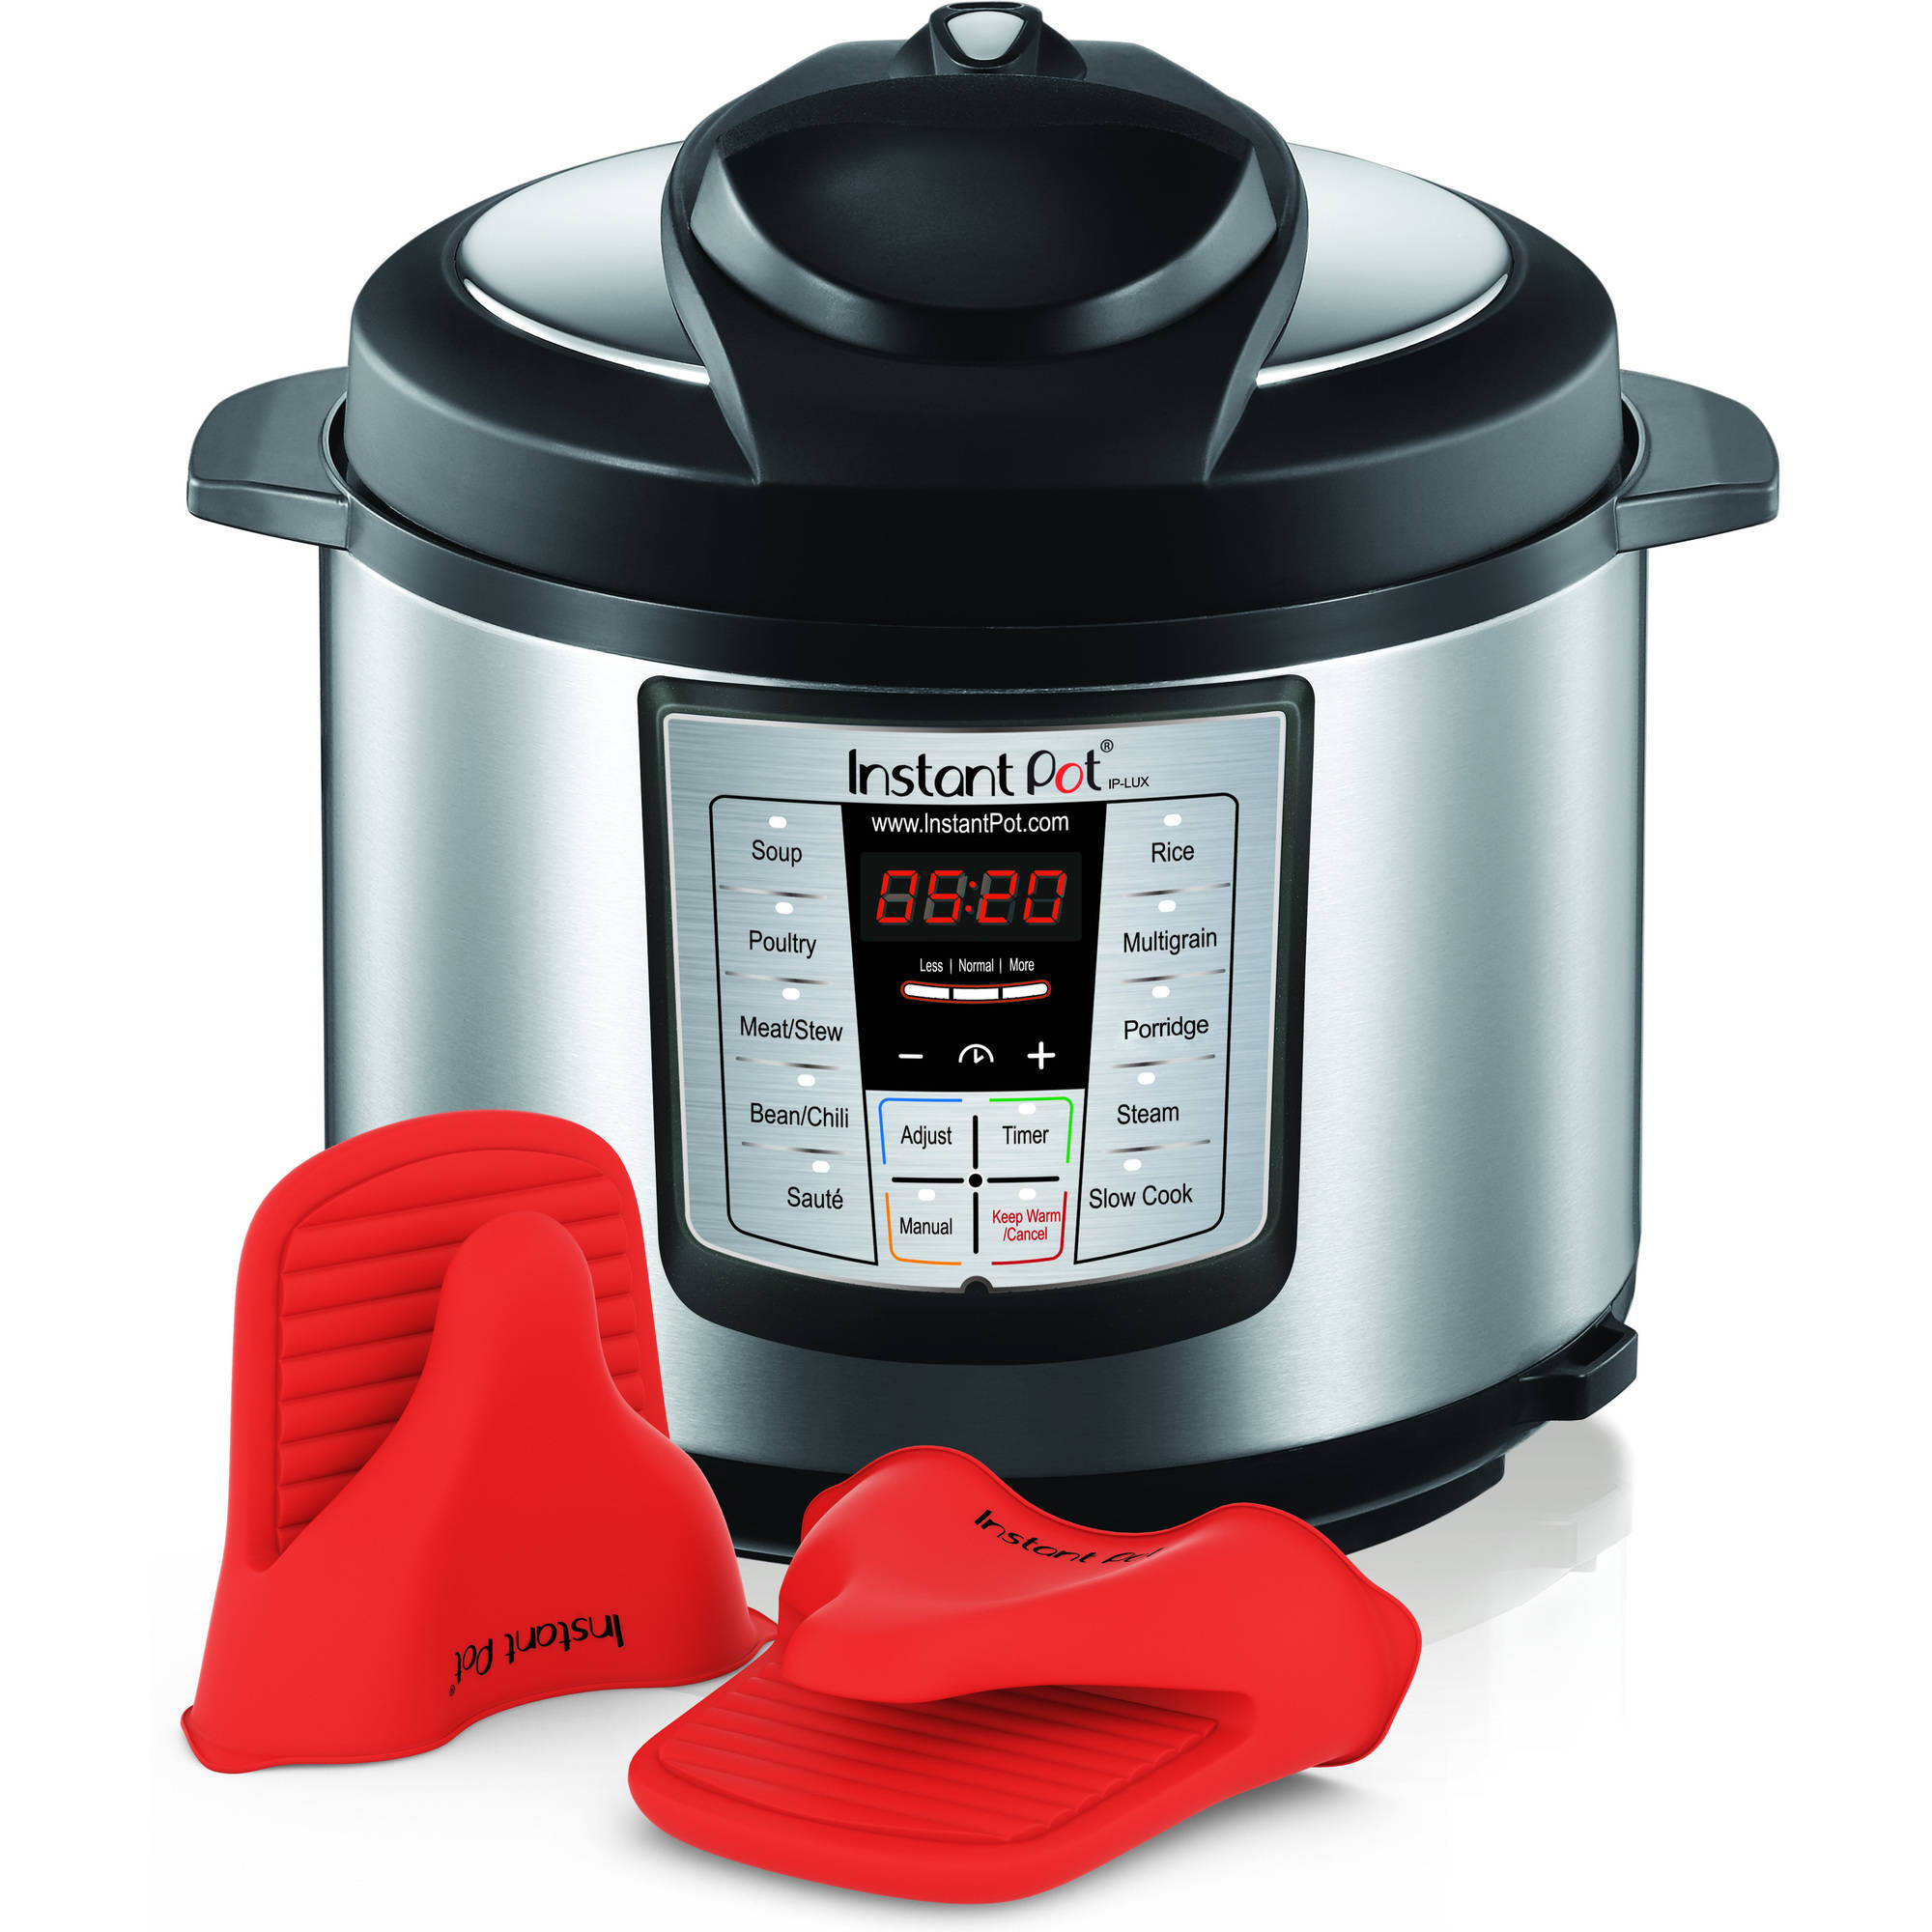 Instant Pot IP-LUX60-ENW Stainless Steel 6-in-1 Pressure Cooker with Mini Mitts - image 1 of 6